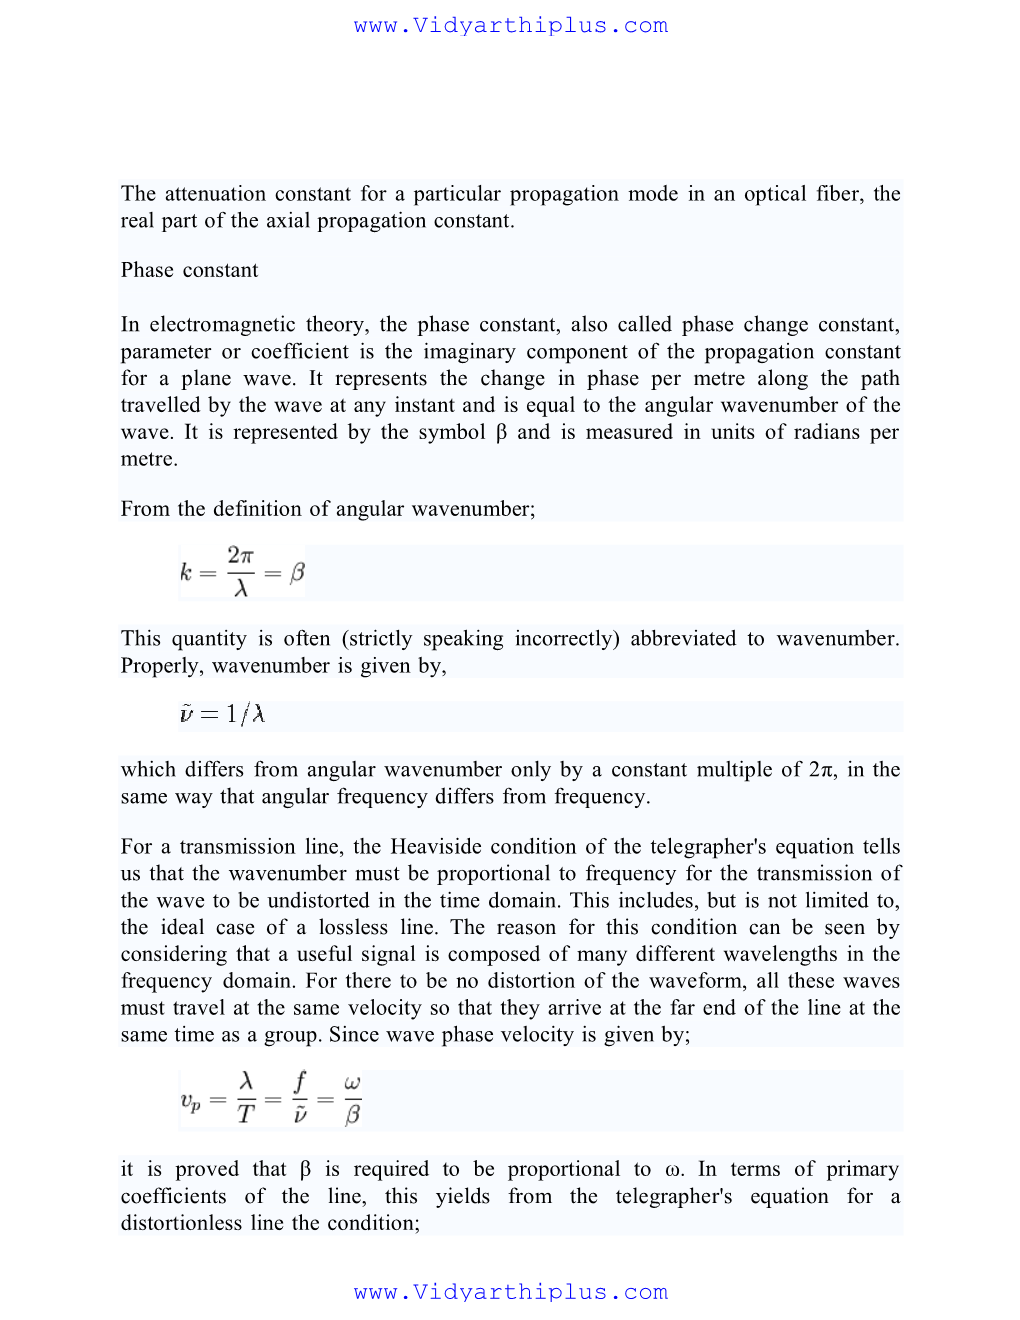 Page 1 the Attenuation Constant for a Particular Propagation Mode in An